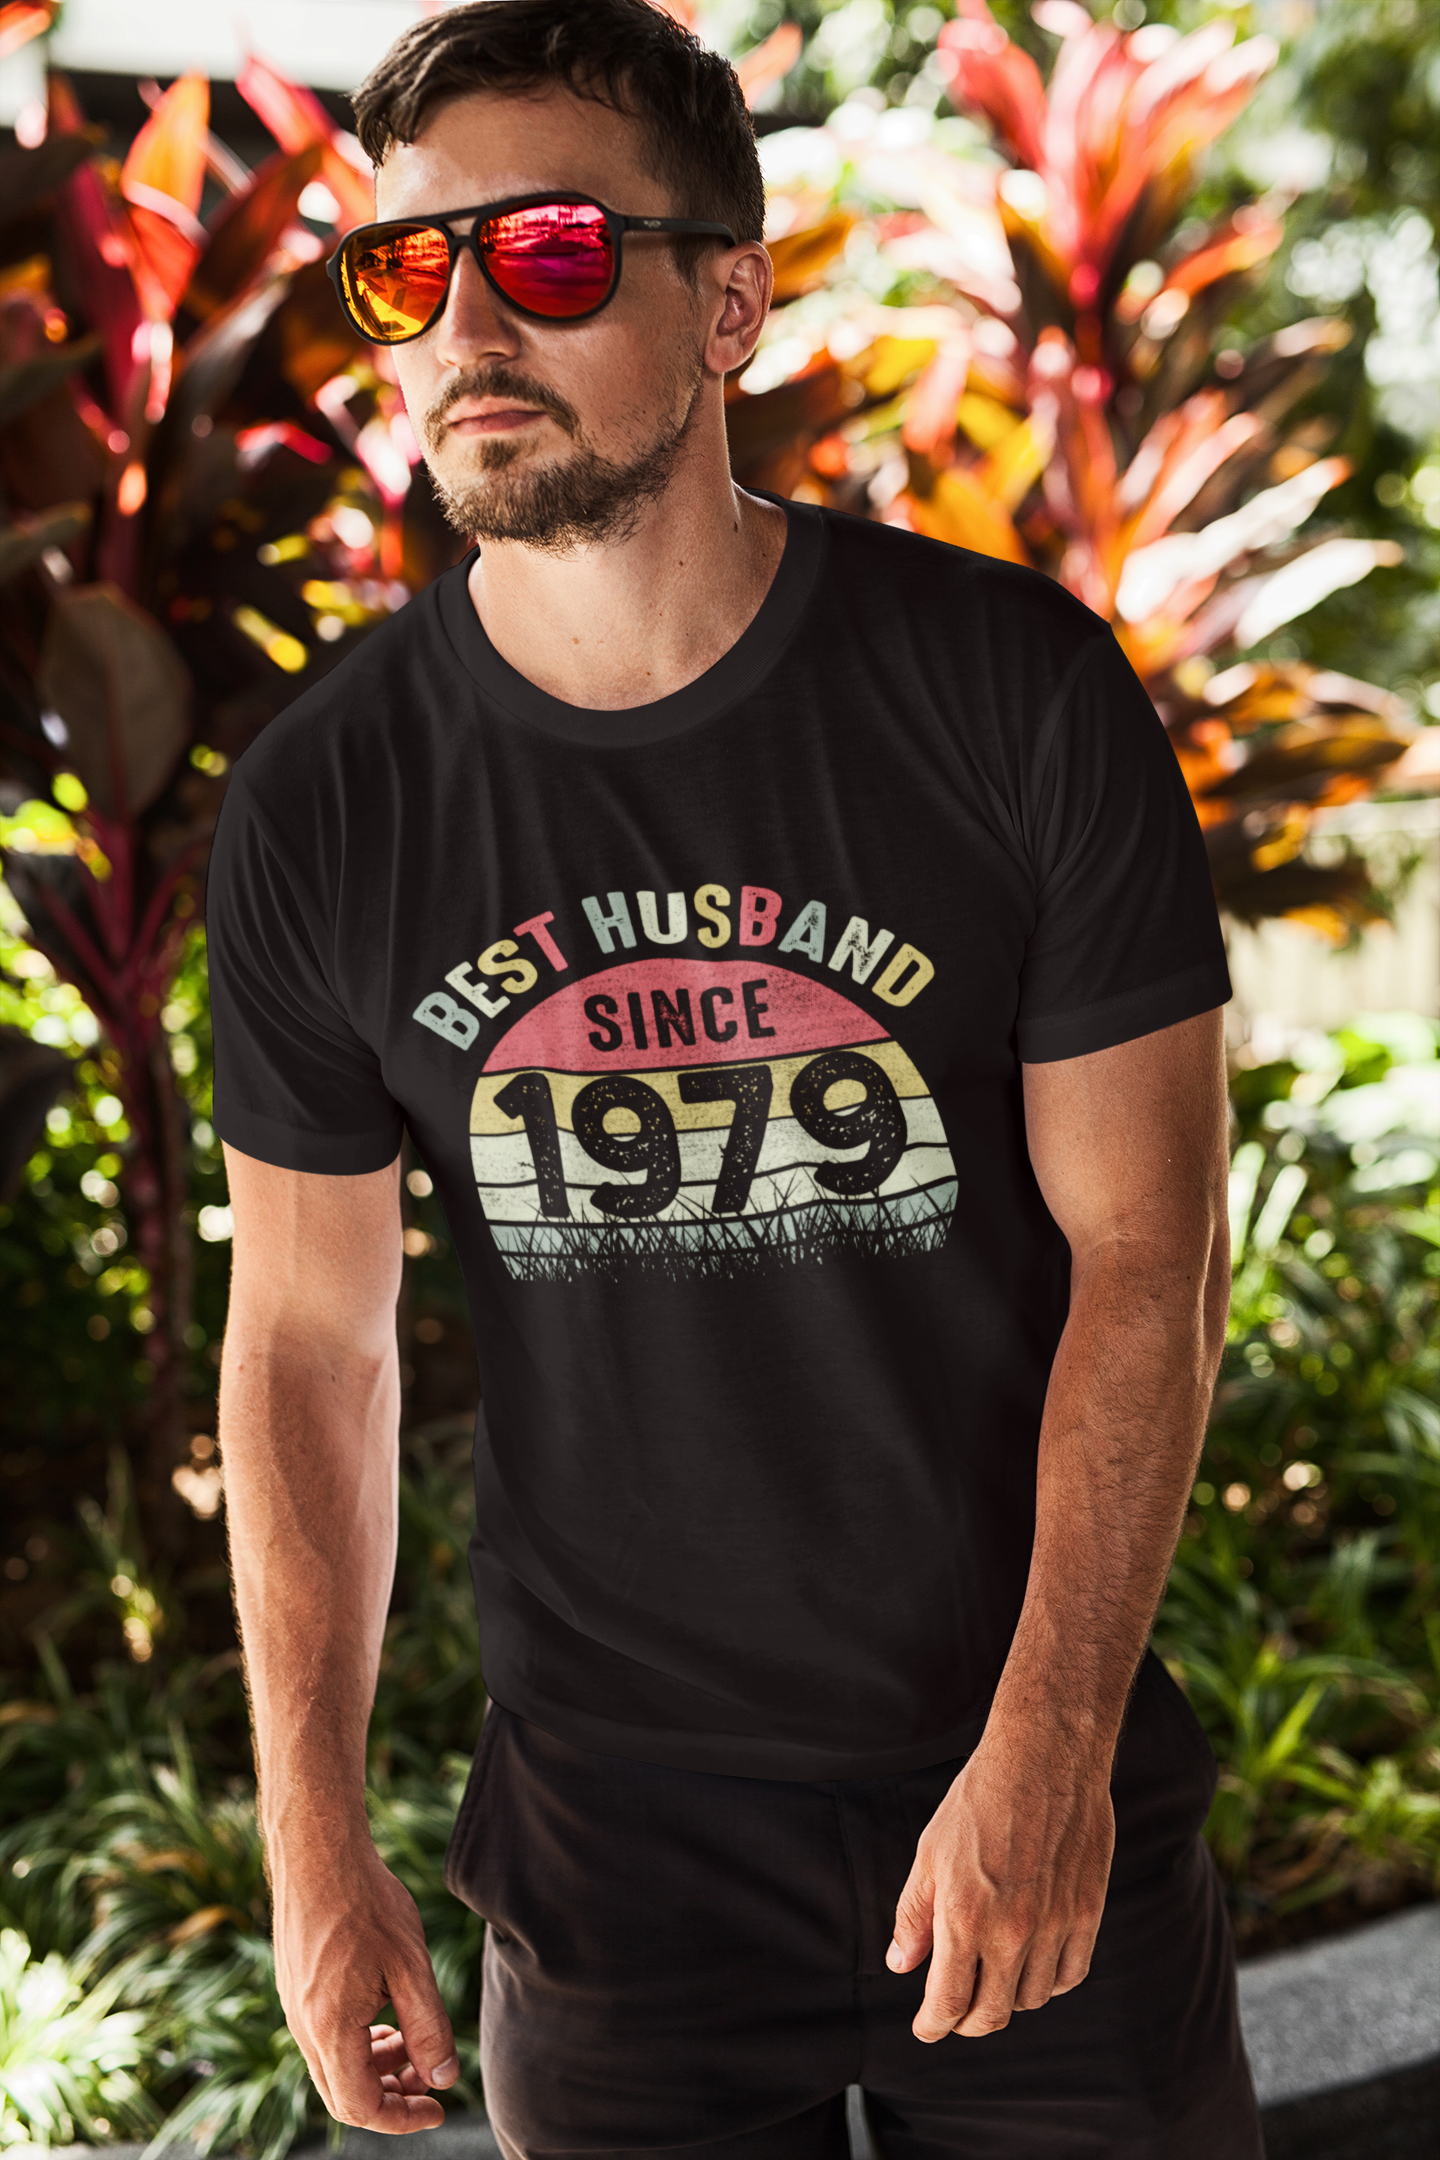 ULTRABASIC Men's T-Shirt Best Husband since 1979 - Retro 42nd Marriage Anniversary Gift for Him